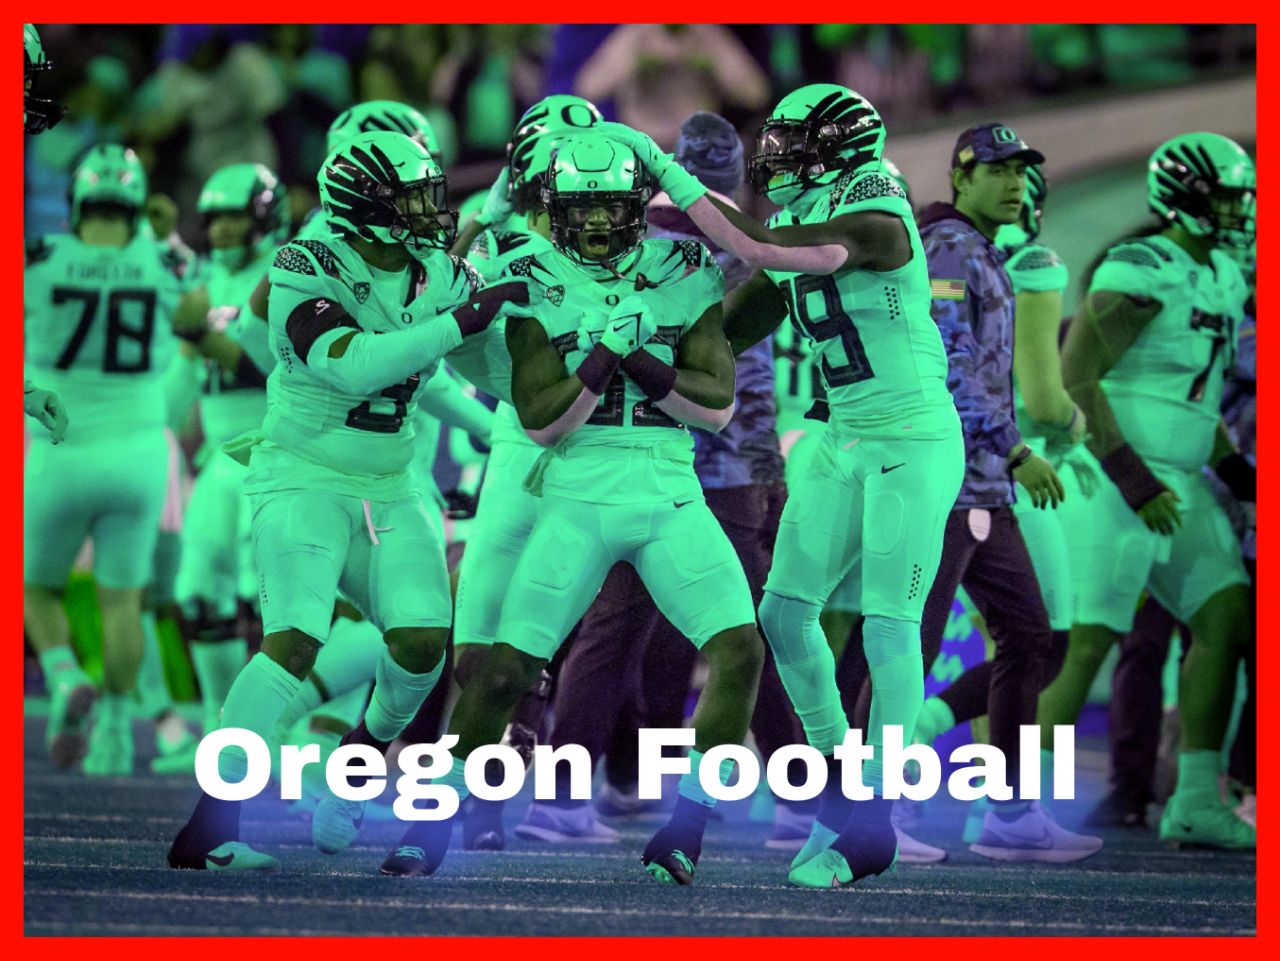 Oregon Football Team in Action